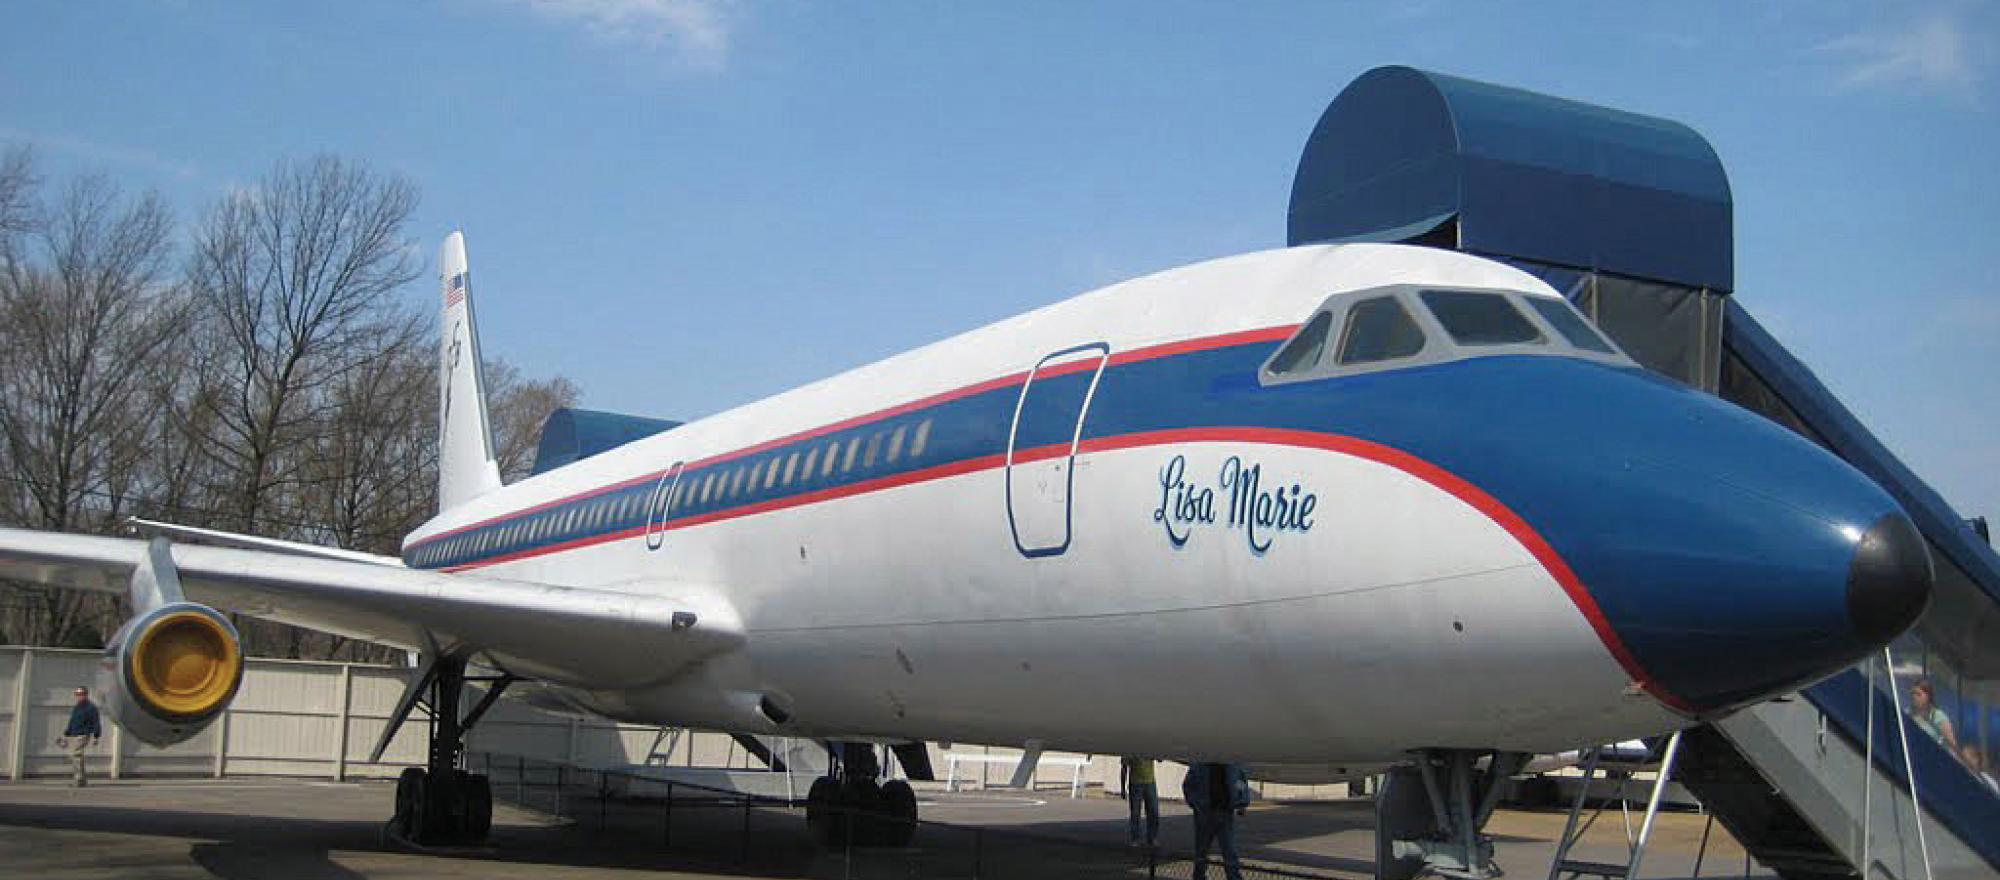 The Lisa Marie, a Convair 880, is named for Presley’s daughter.